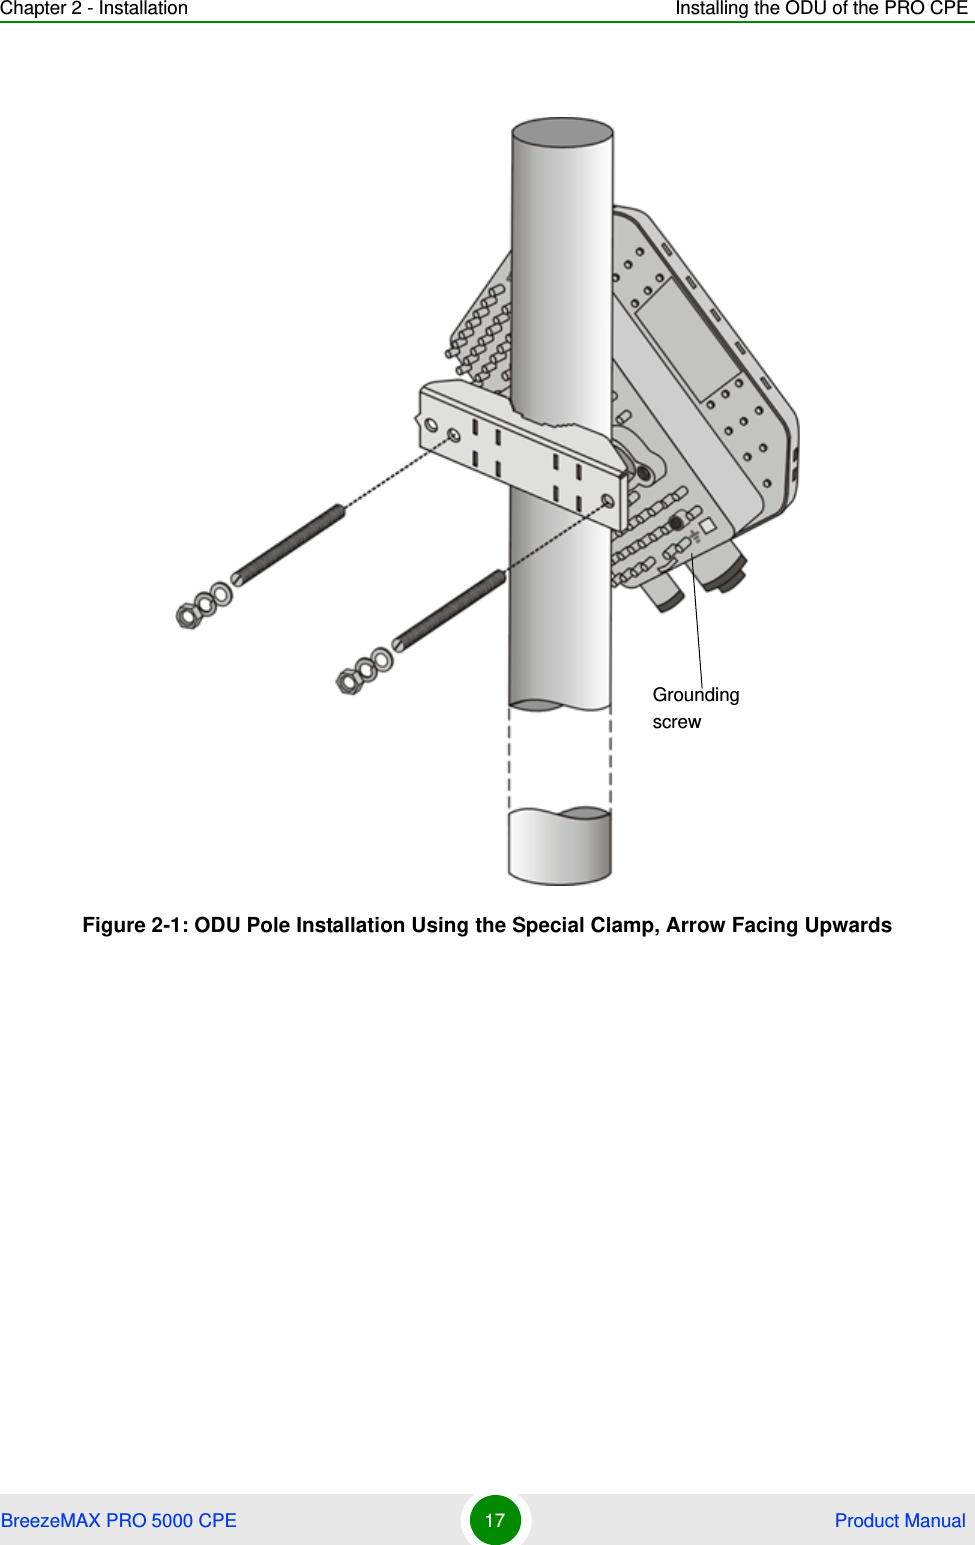 Chapter 2 - Installation Installing the ODU of the PRO CPEBreezeMAX PRO 5000 CPE 17  Product ManualFigure 2-1: ODU Pole Installation Using the Special Clamp, Arrow Facing UpwardsGrounding screw